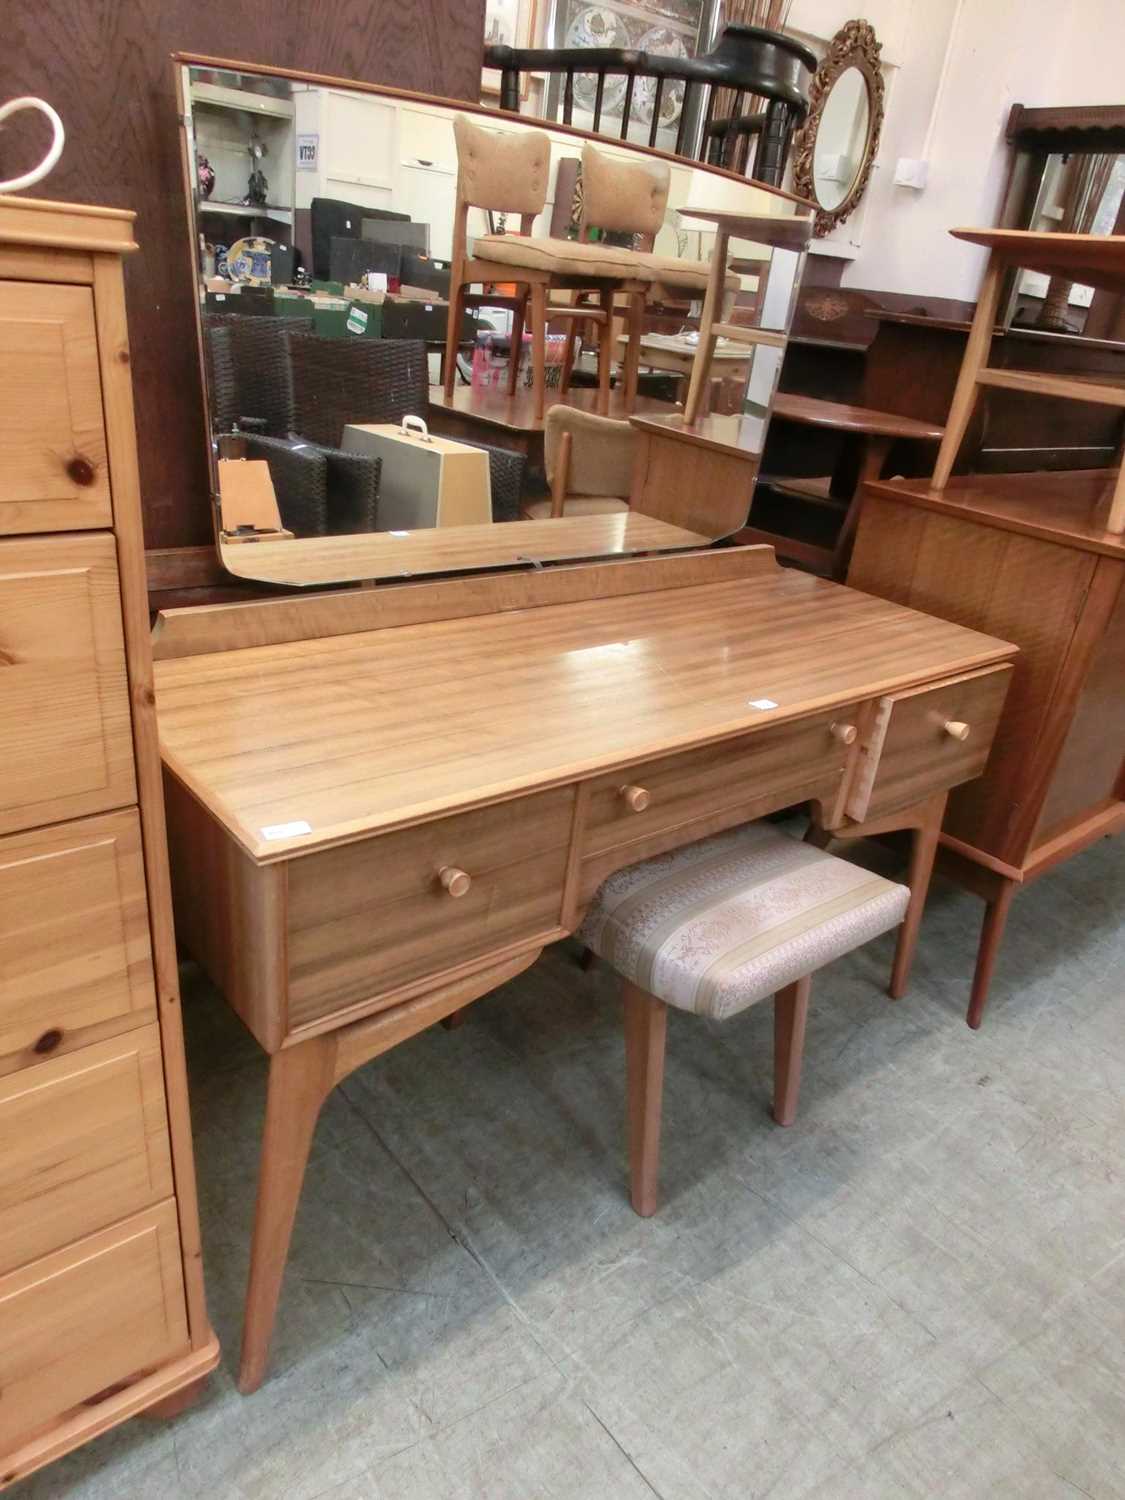 A modern walnut finish mirrored back dressing table with three drawers and matching stool